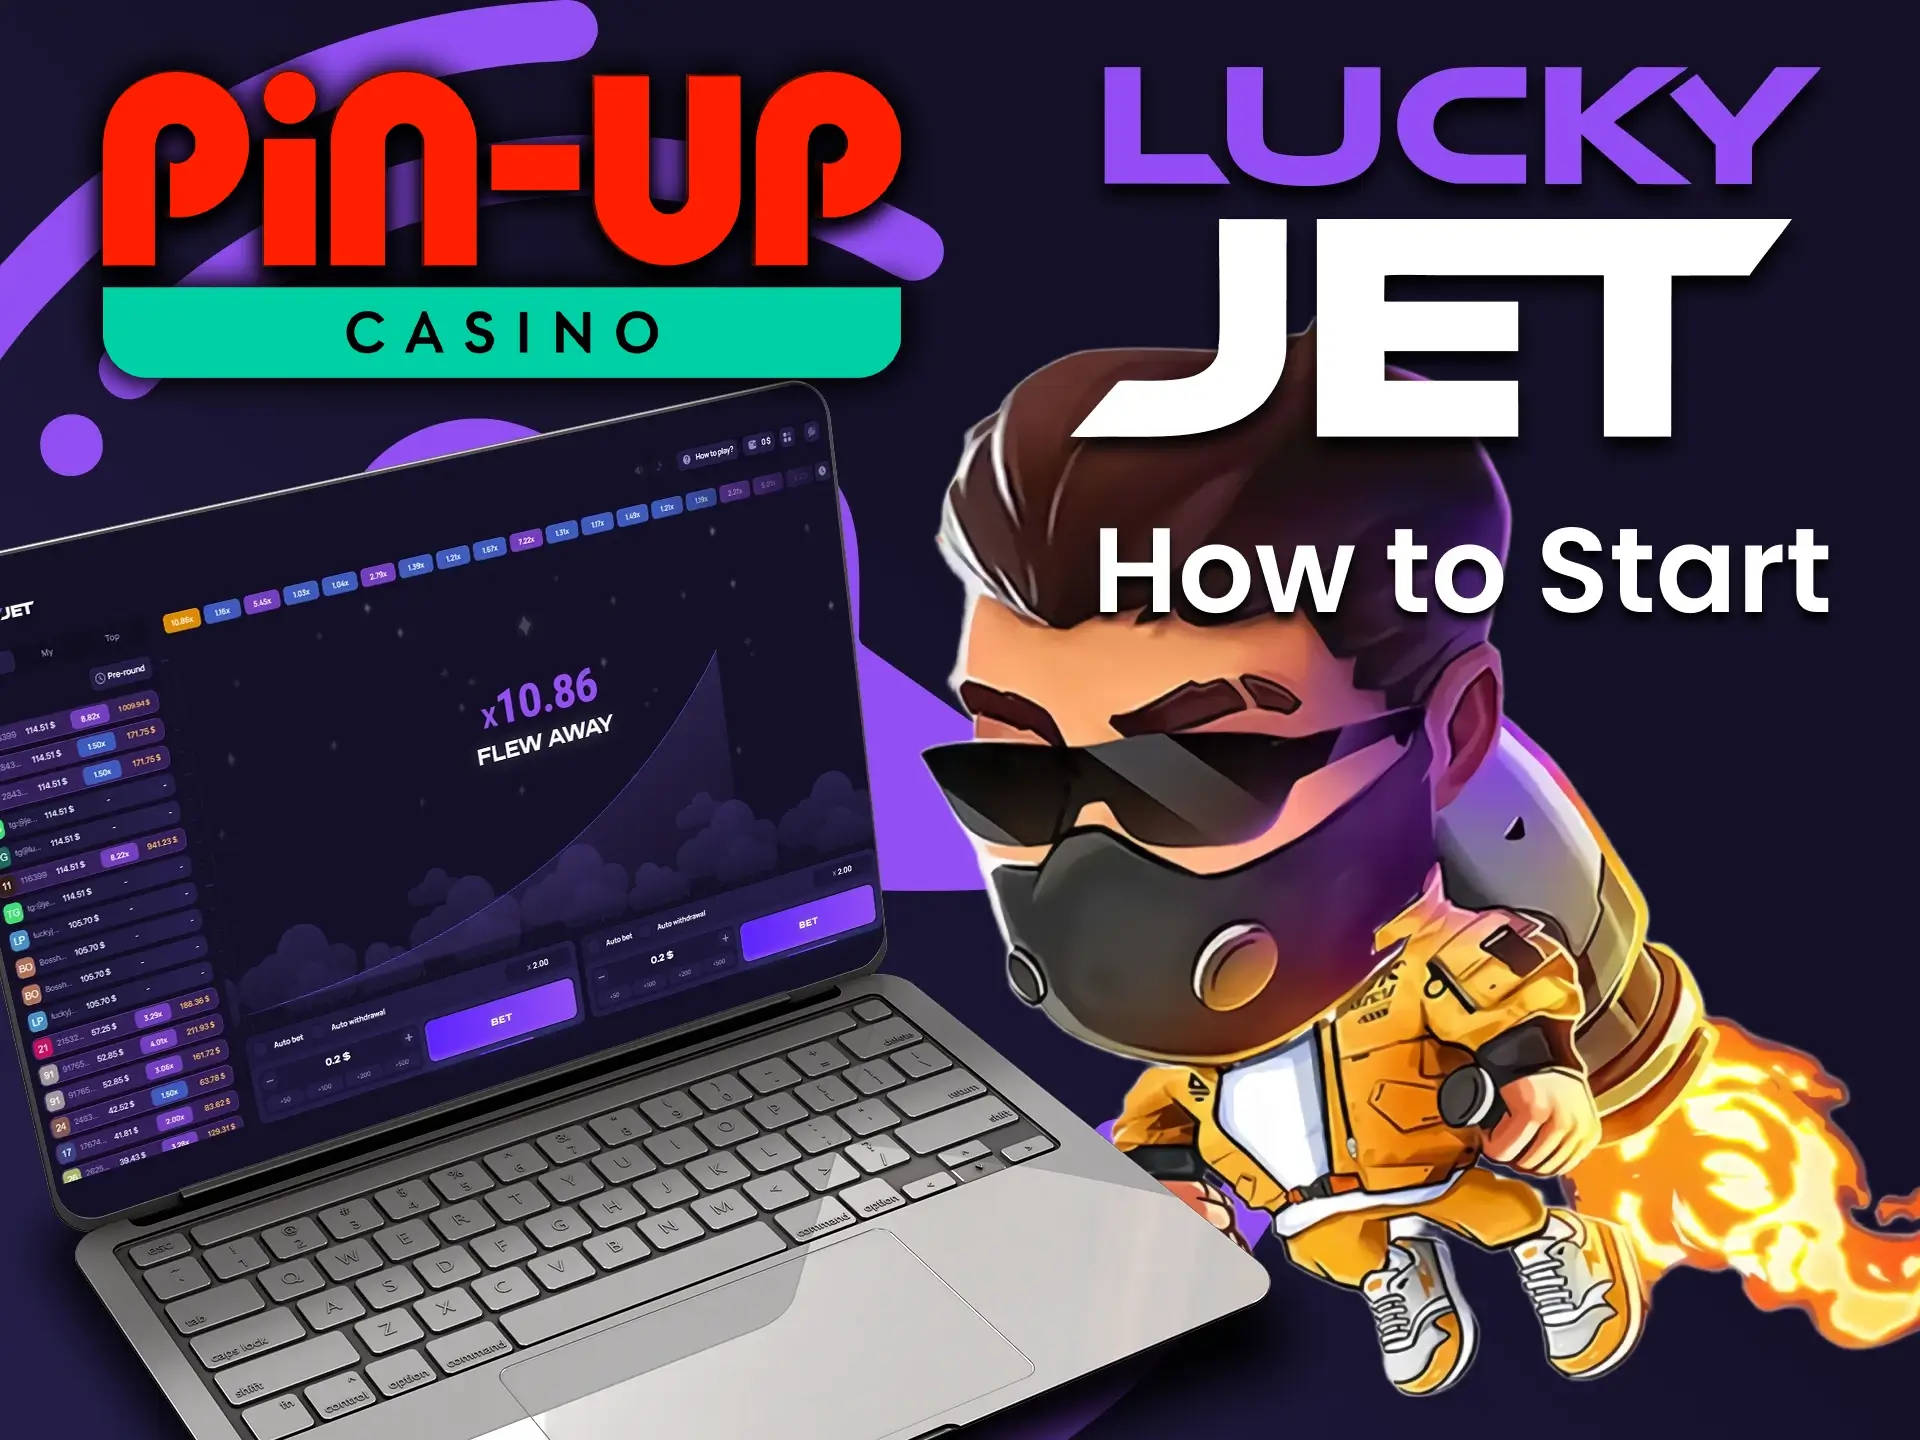 Select the games section on Pin Up to play Lucky Jet.